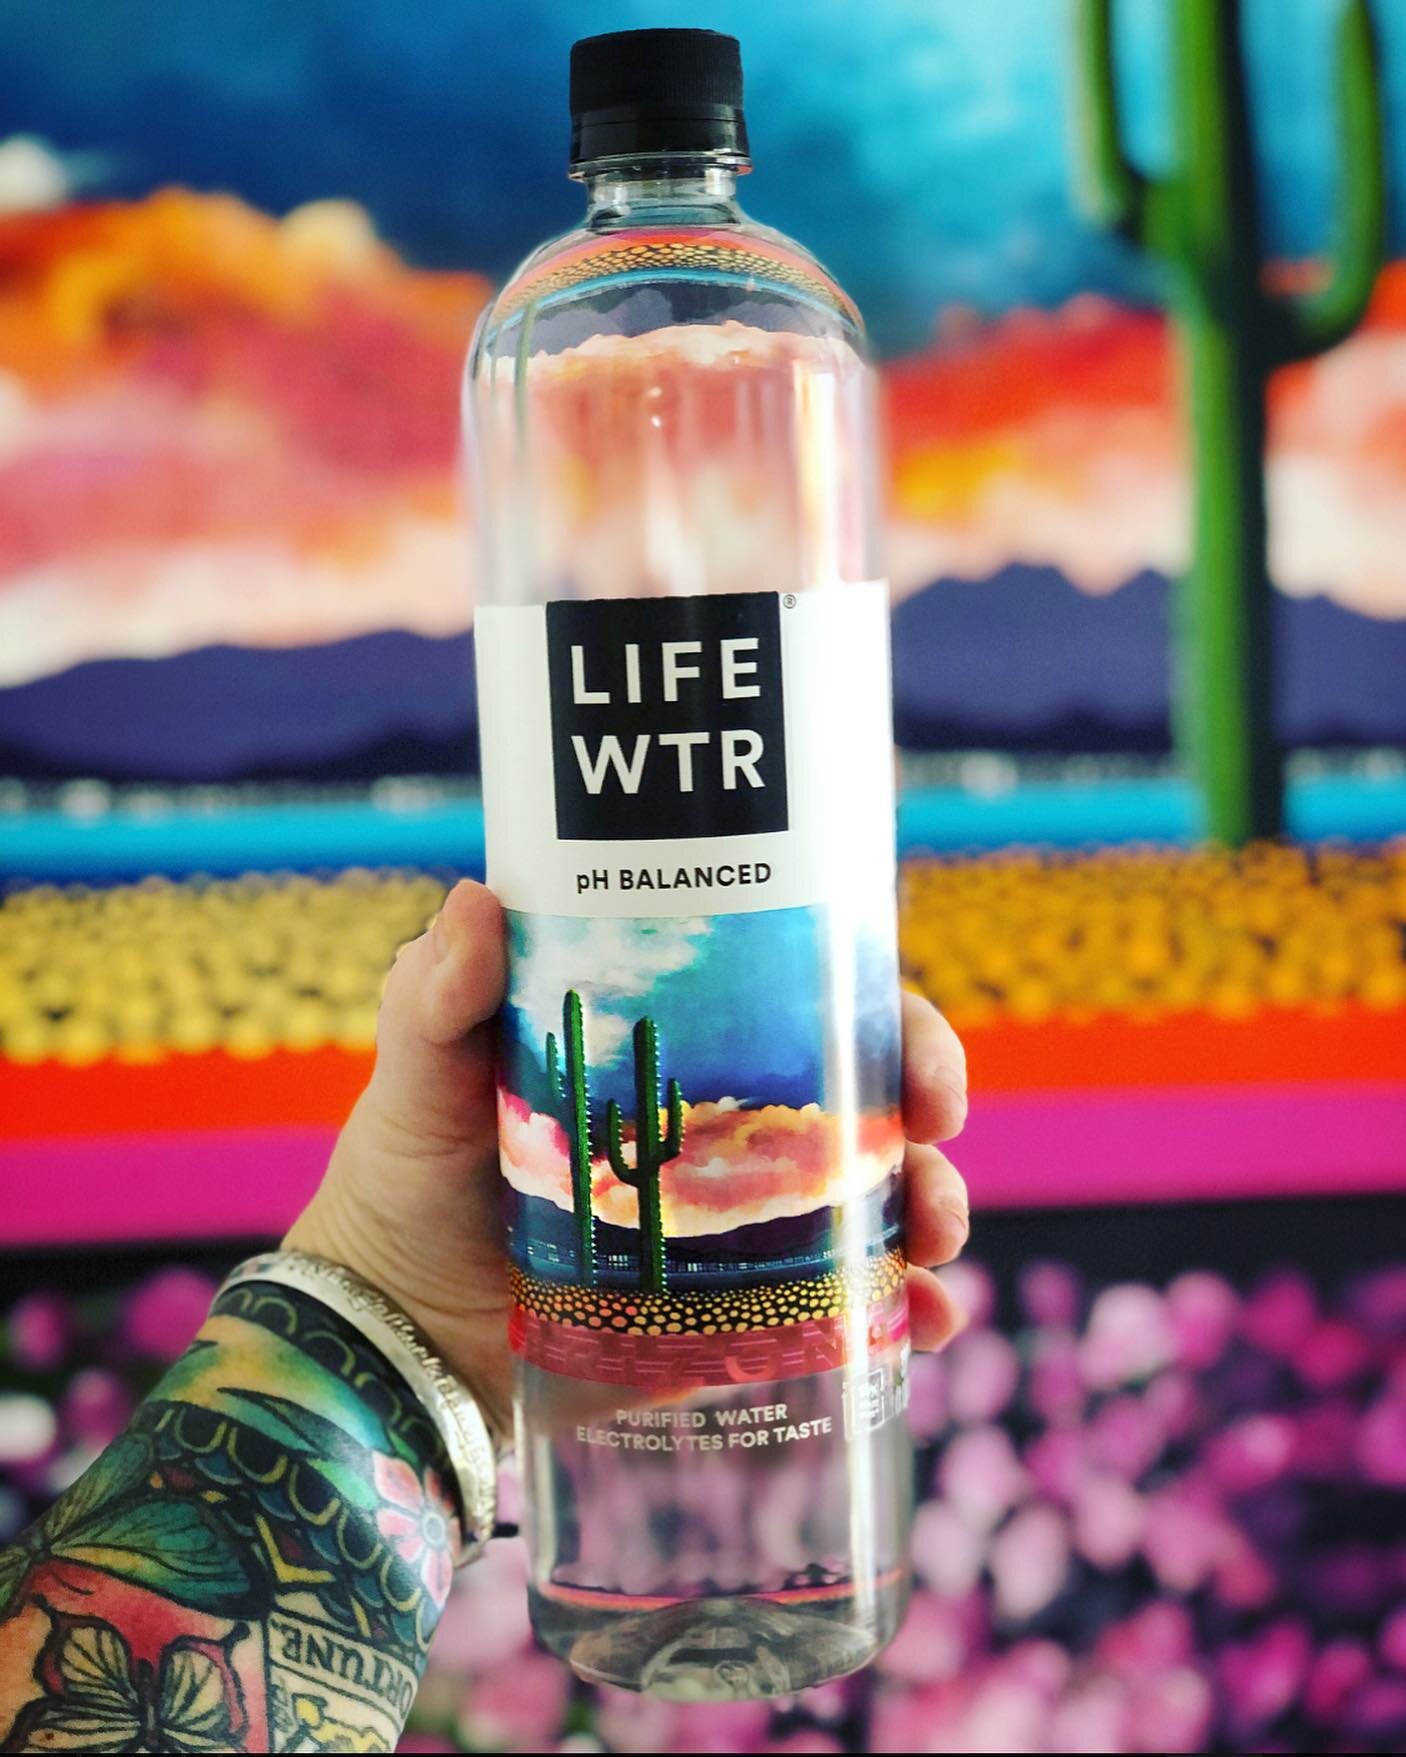 ARIZONA! Well guys the time has arrived that I finally get to share my year in the making partnership with the largest national brand I&rsquo;ve ever worked with: LIFEWTR! They have teamed up with five artists in the WEST region to launch their #Insp